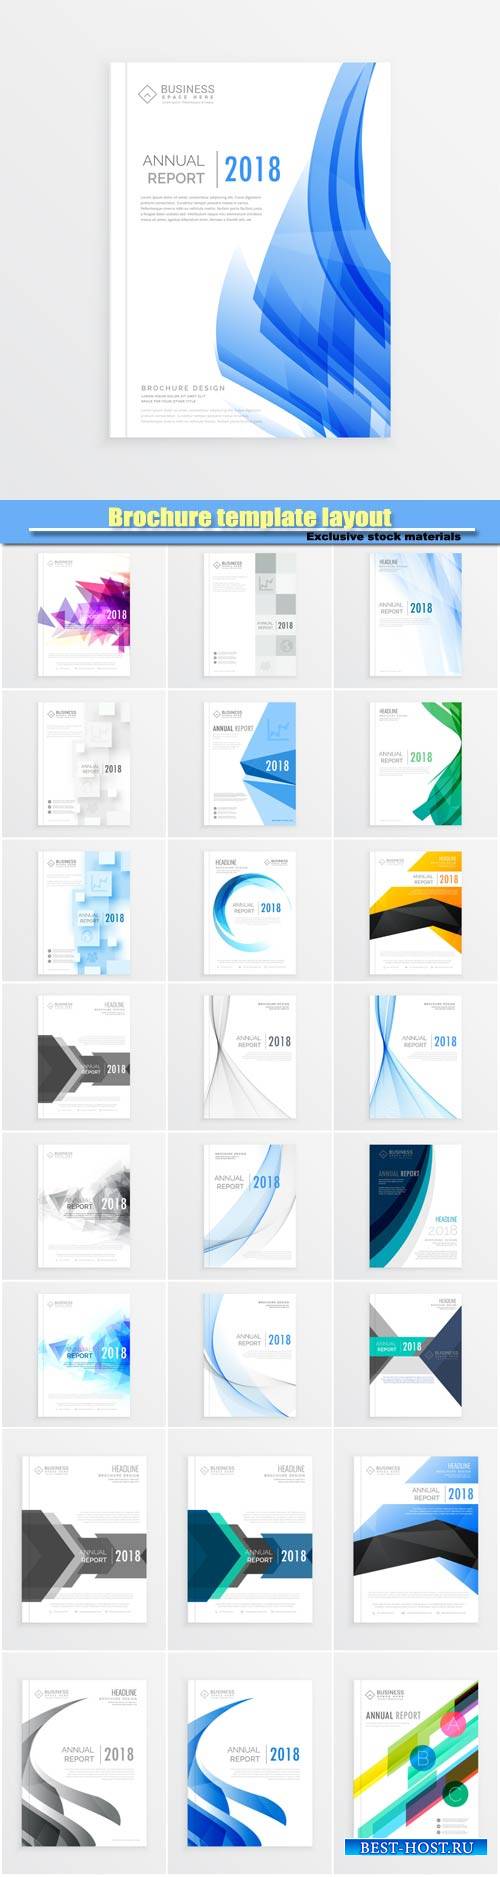 Brochure template layout, annual report cover design, magazine flyer design